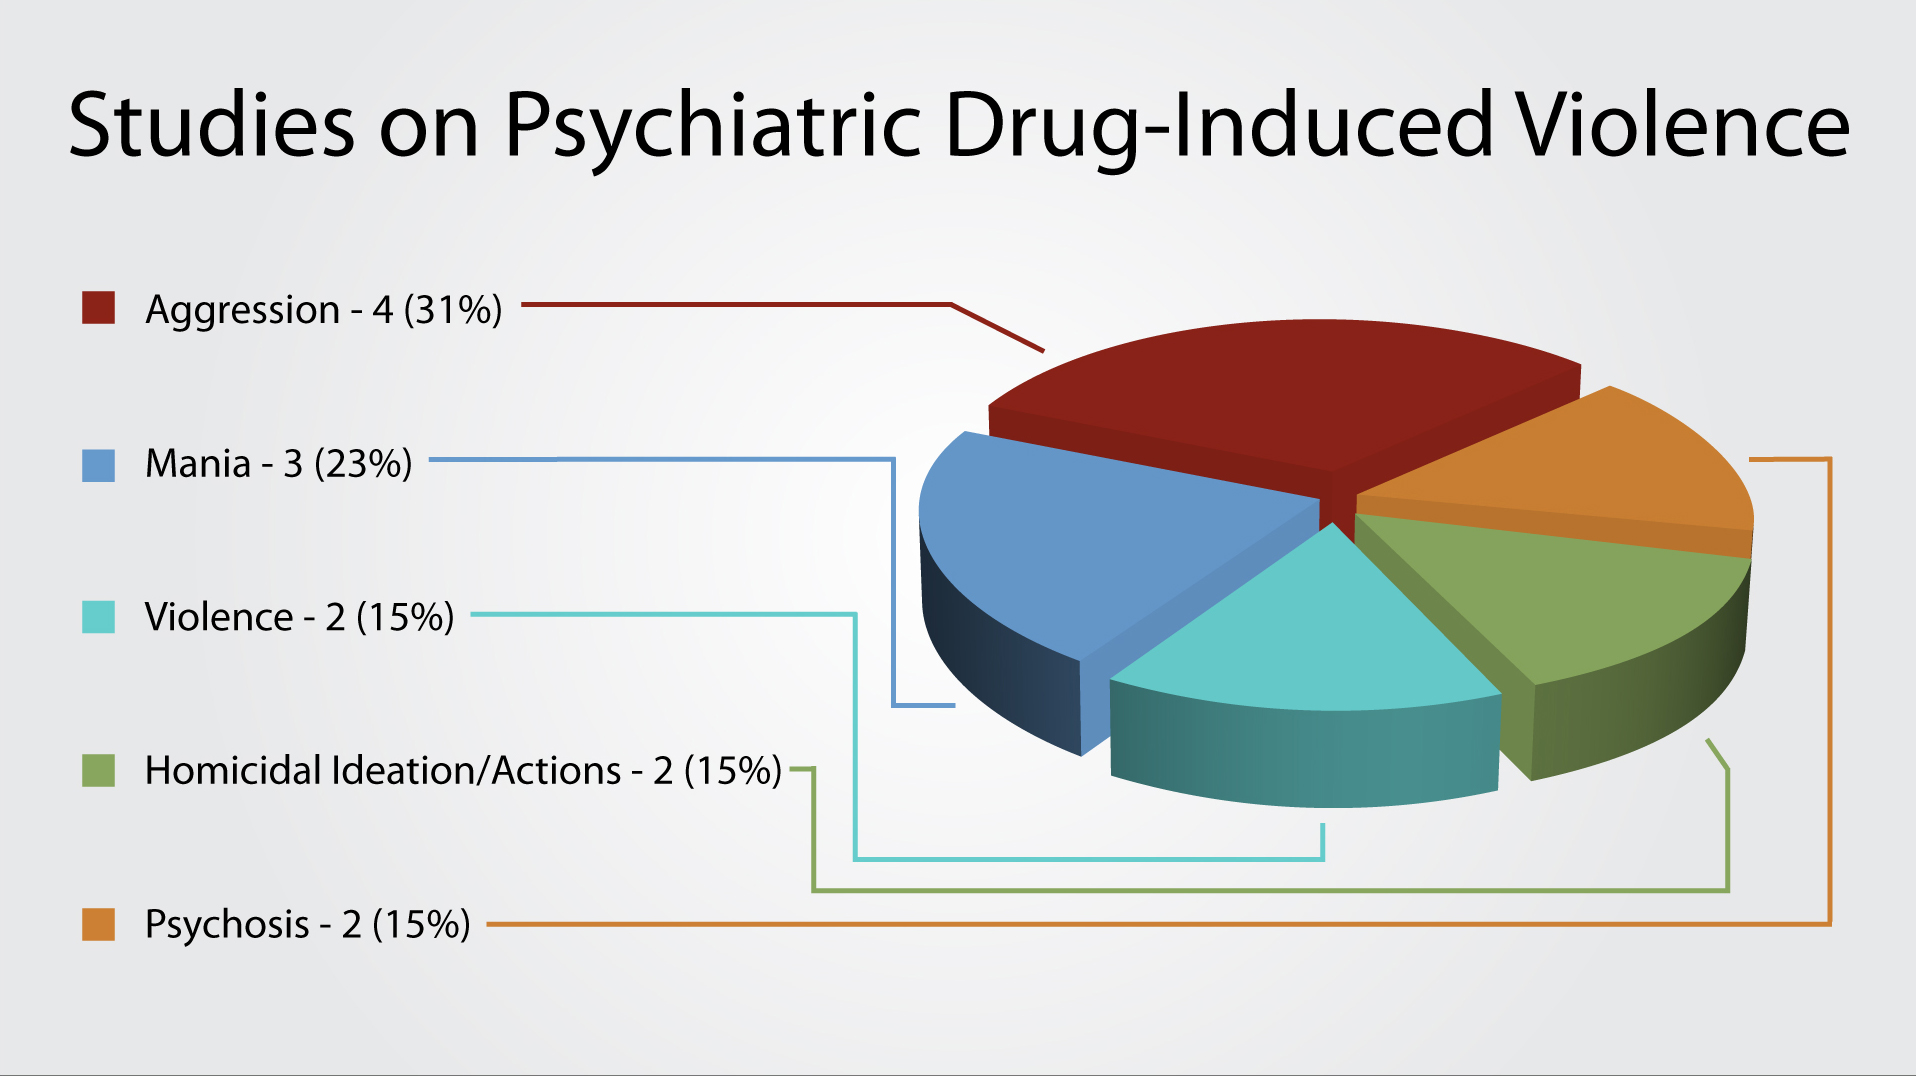 There have been 10 studies in four countries on psychiatric drug-induced violence. View graph for details.